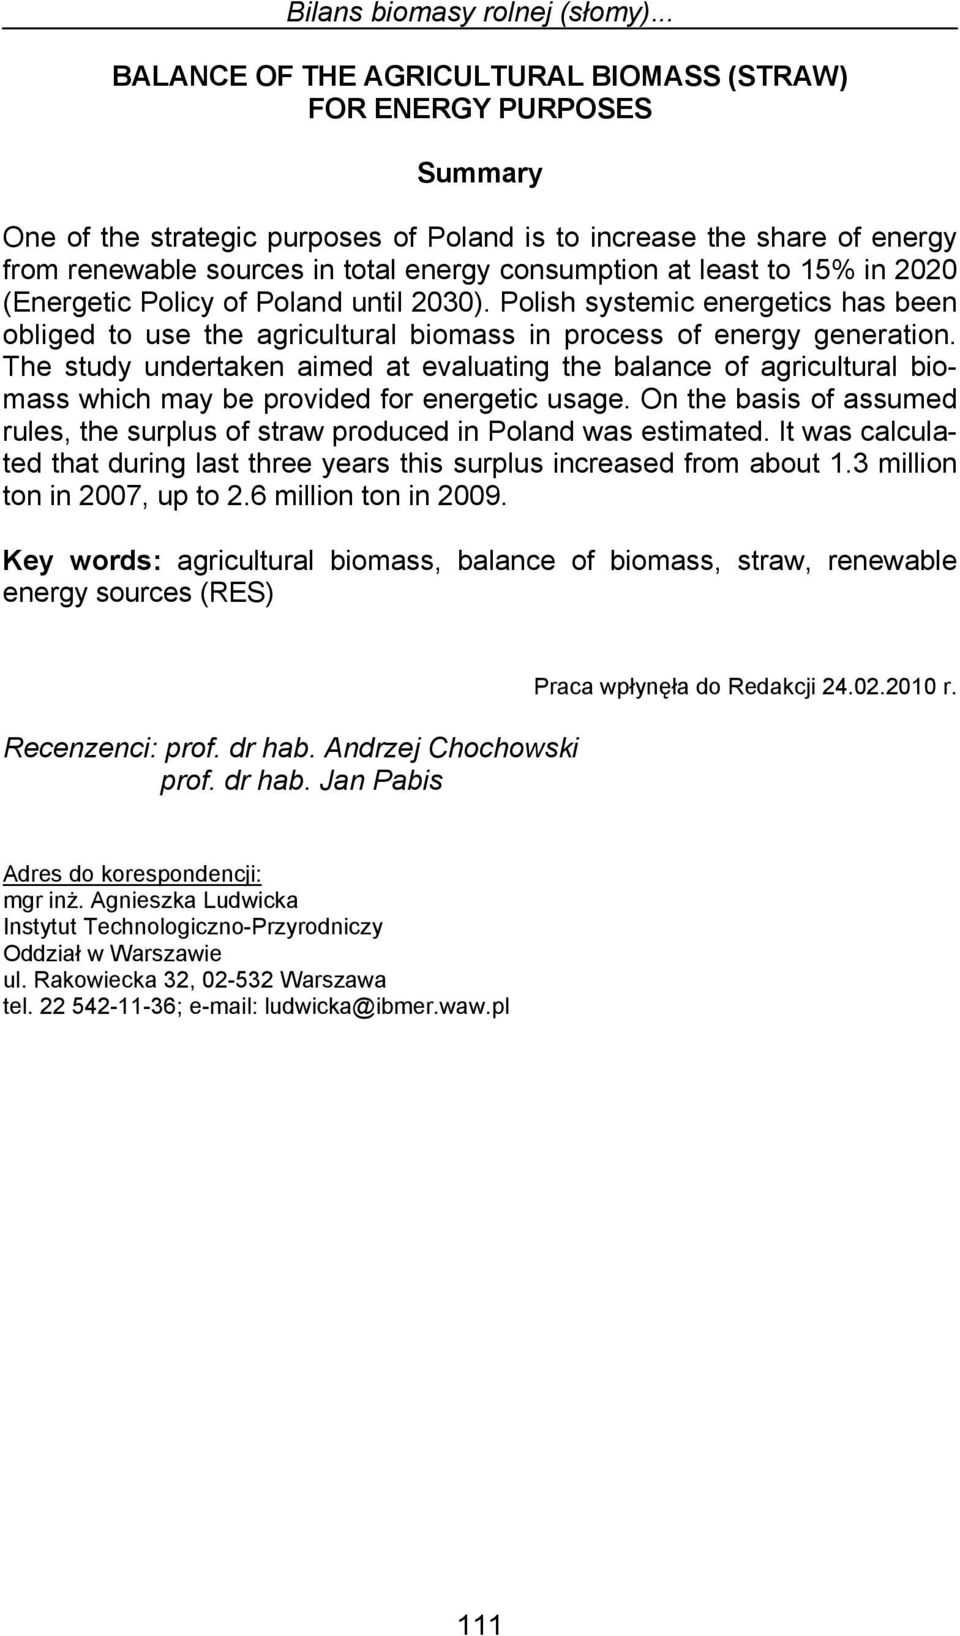 consumption at least to 15% in 2020 (Energetic Policy of Poland until 2030). Polish systemic energetics has been obliged to use the agricultural biomass in process of energy generation.